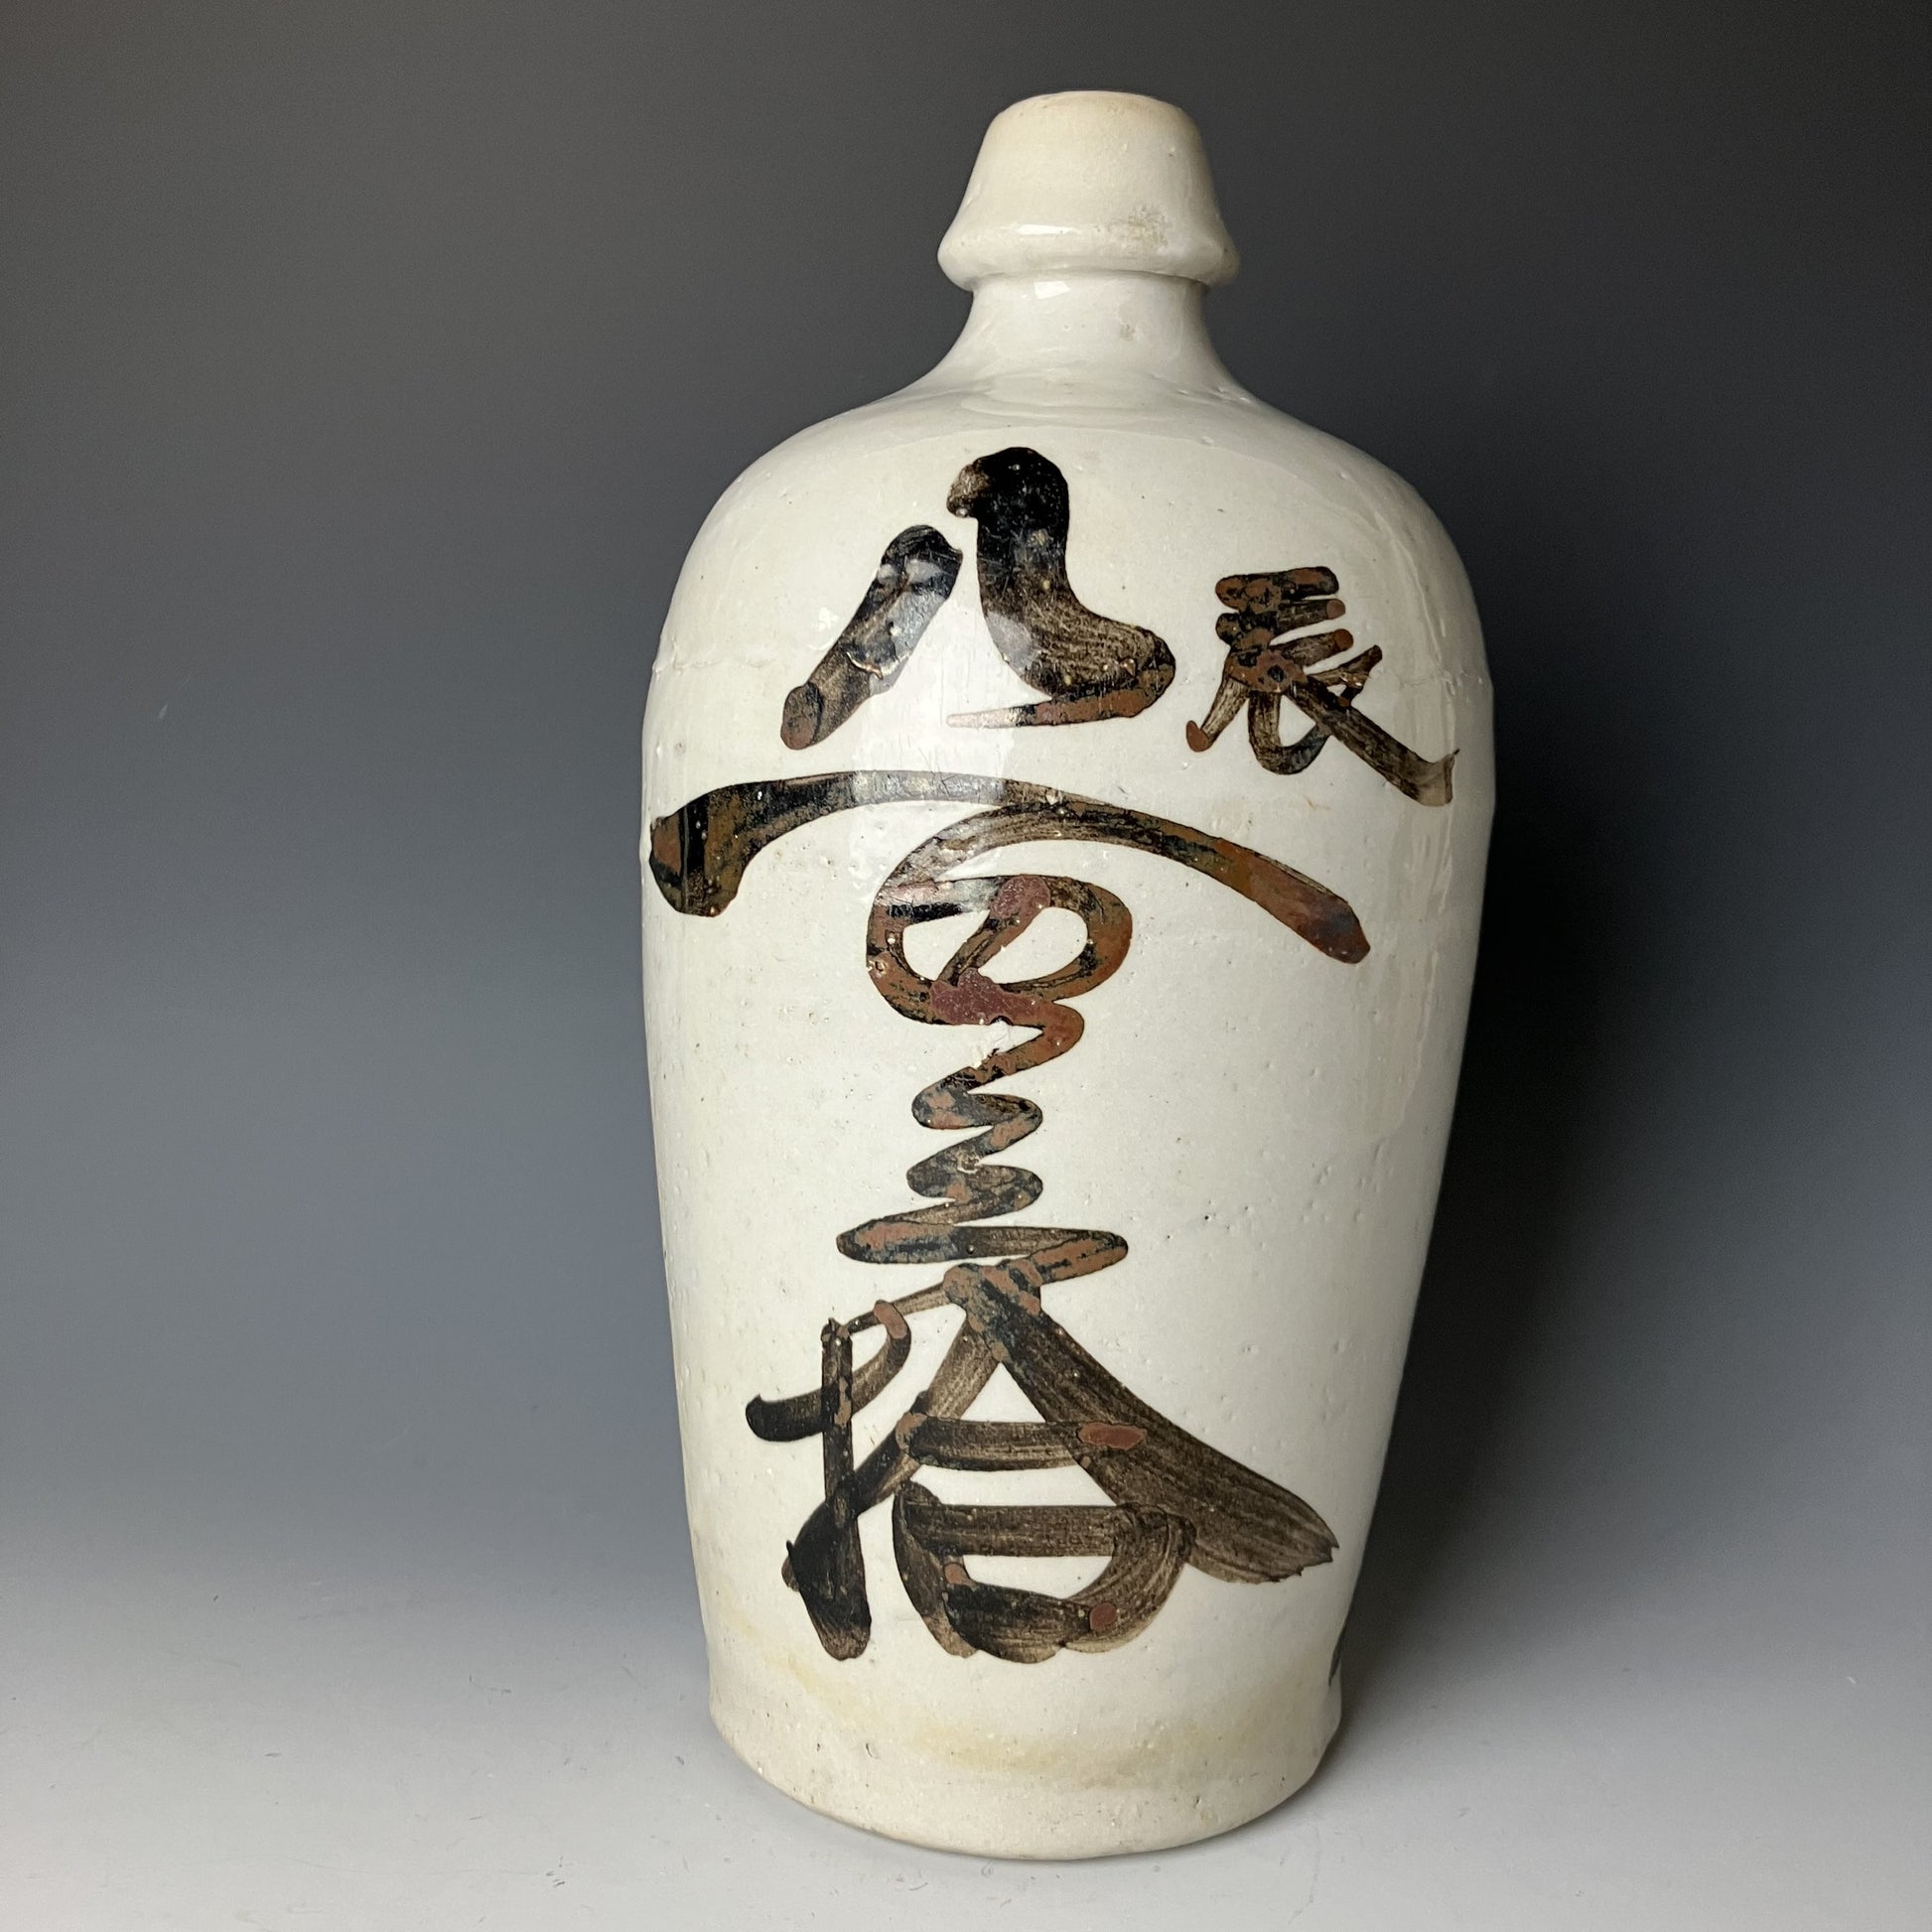 A vintage Japanese ceramic sake bottle (Tokkuri) with bold calligraphy, featuring a white background with prominent dark brown and black brush strokes.